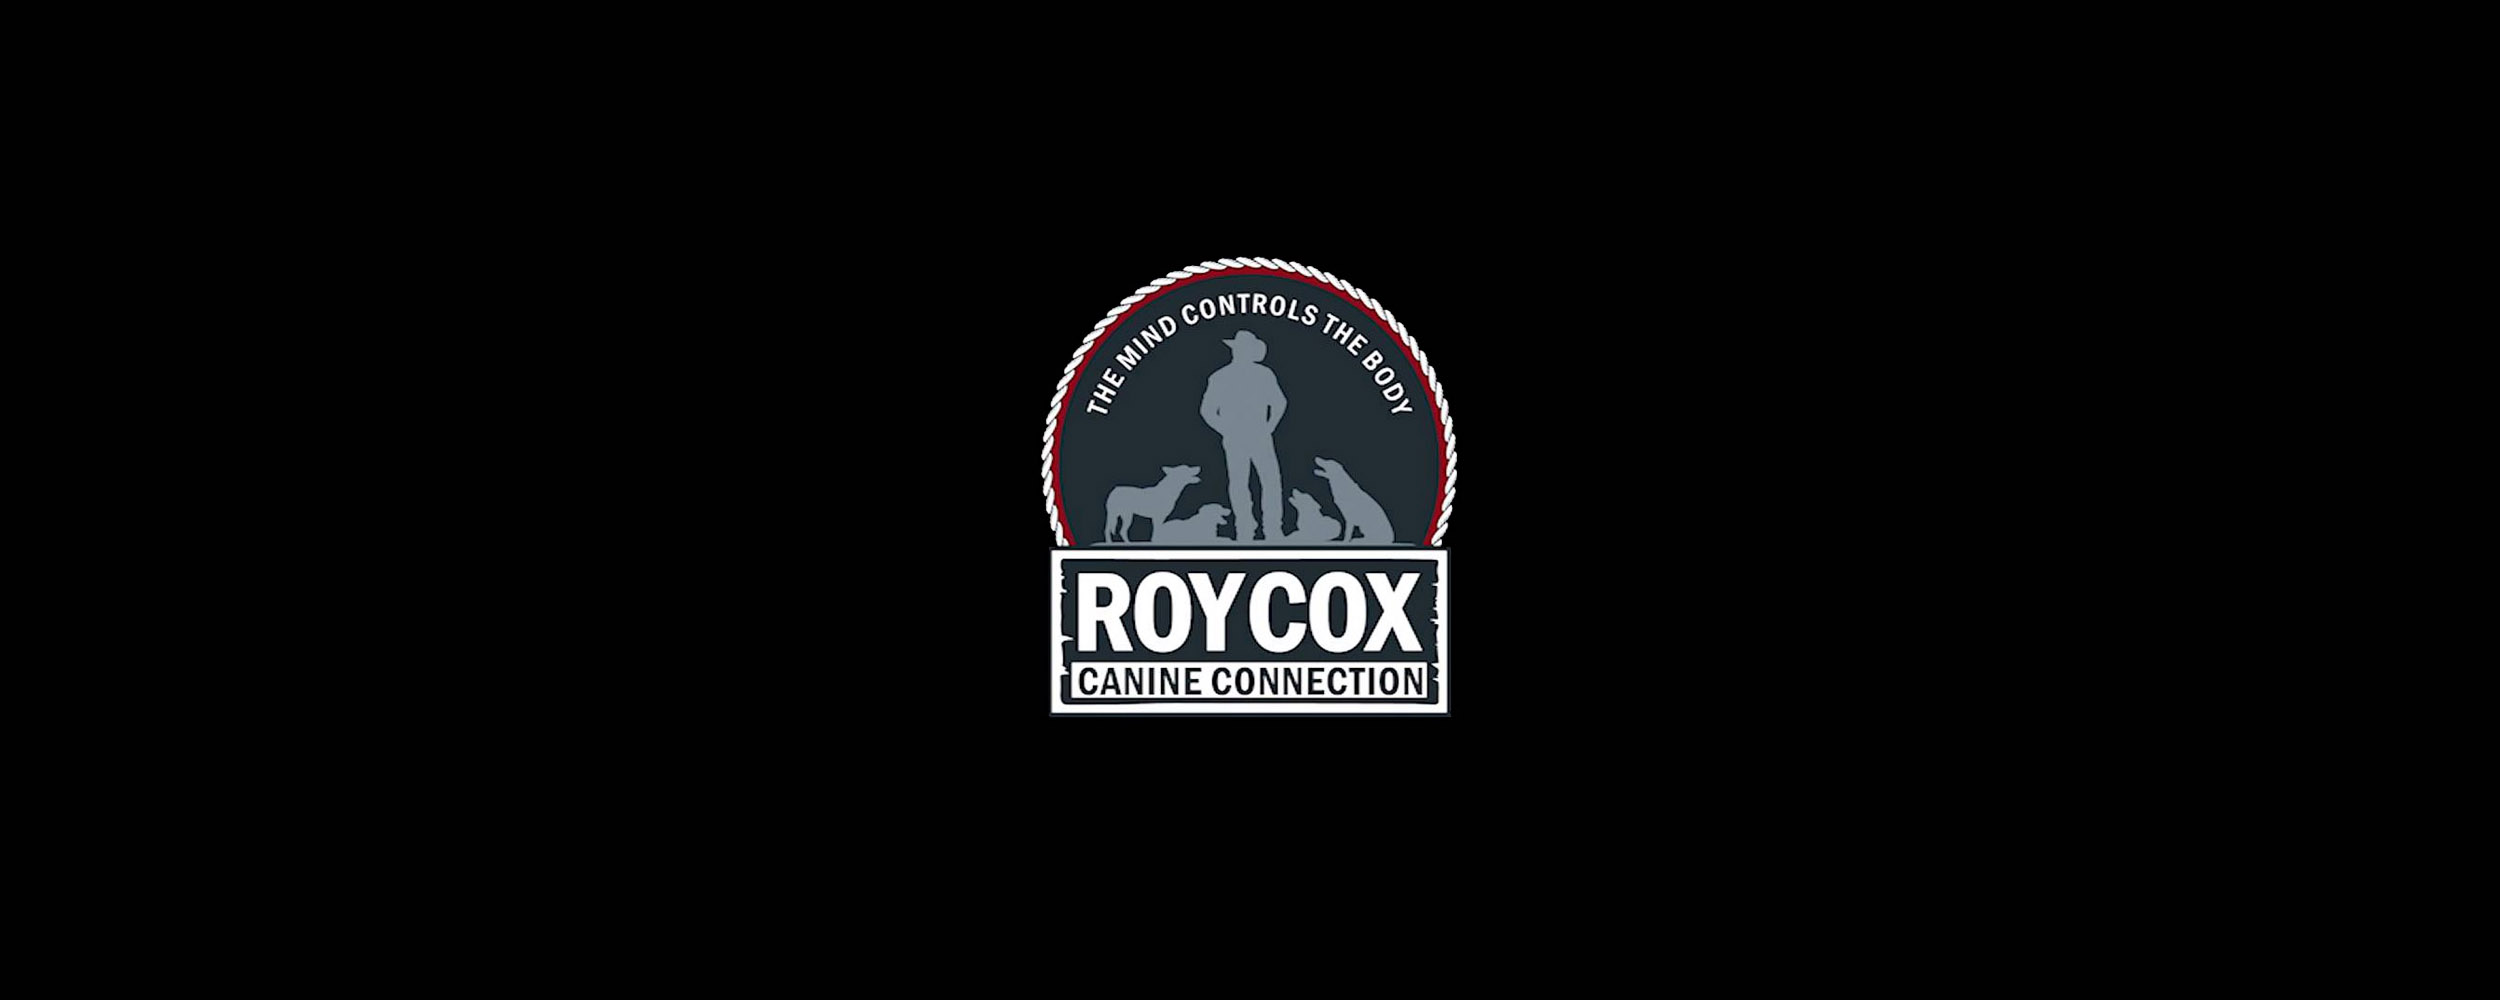 JAKE will be presented and sold by Roy Cox December 9, 2015 @ 3pm